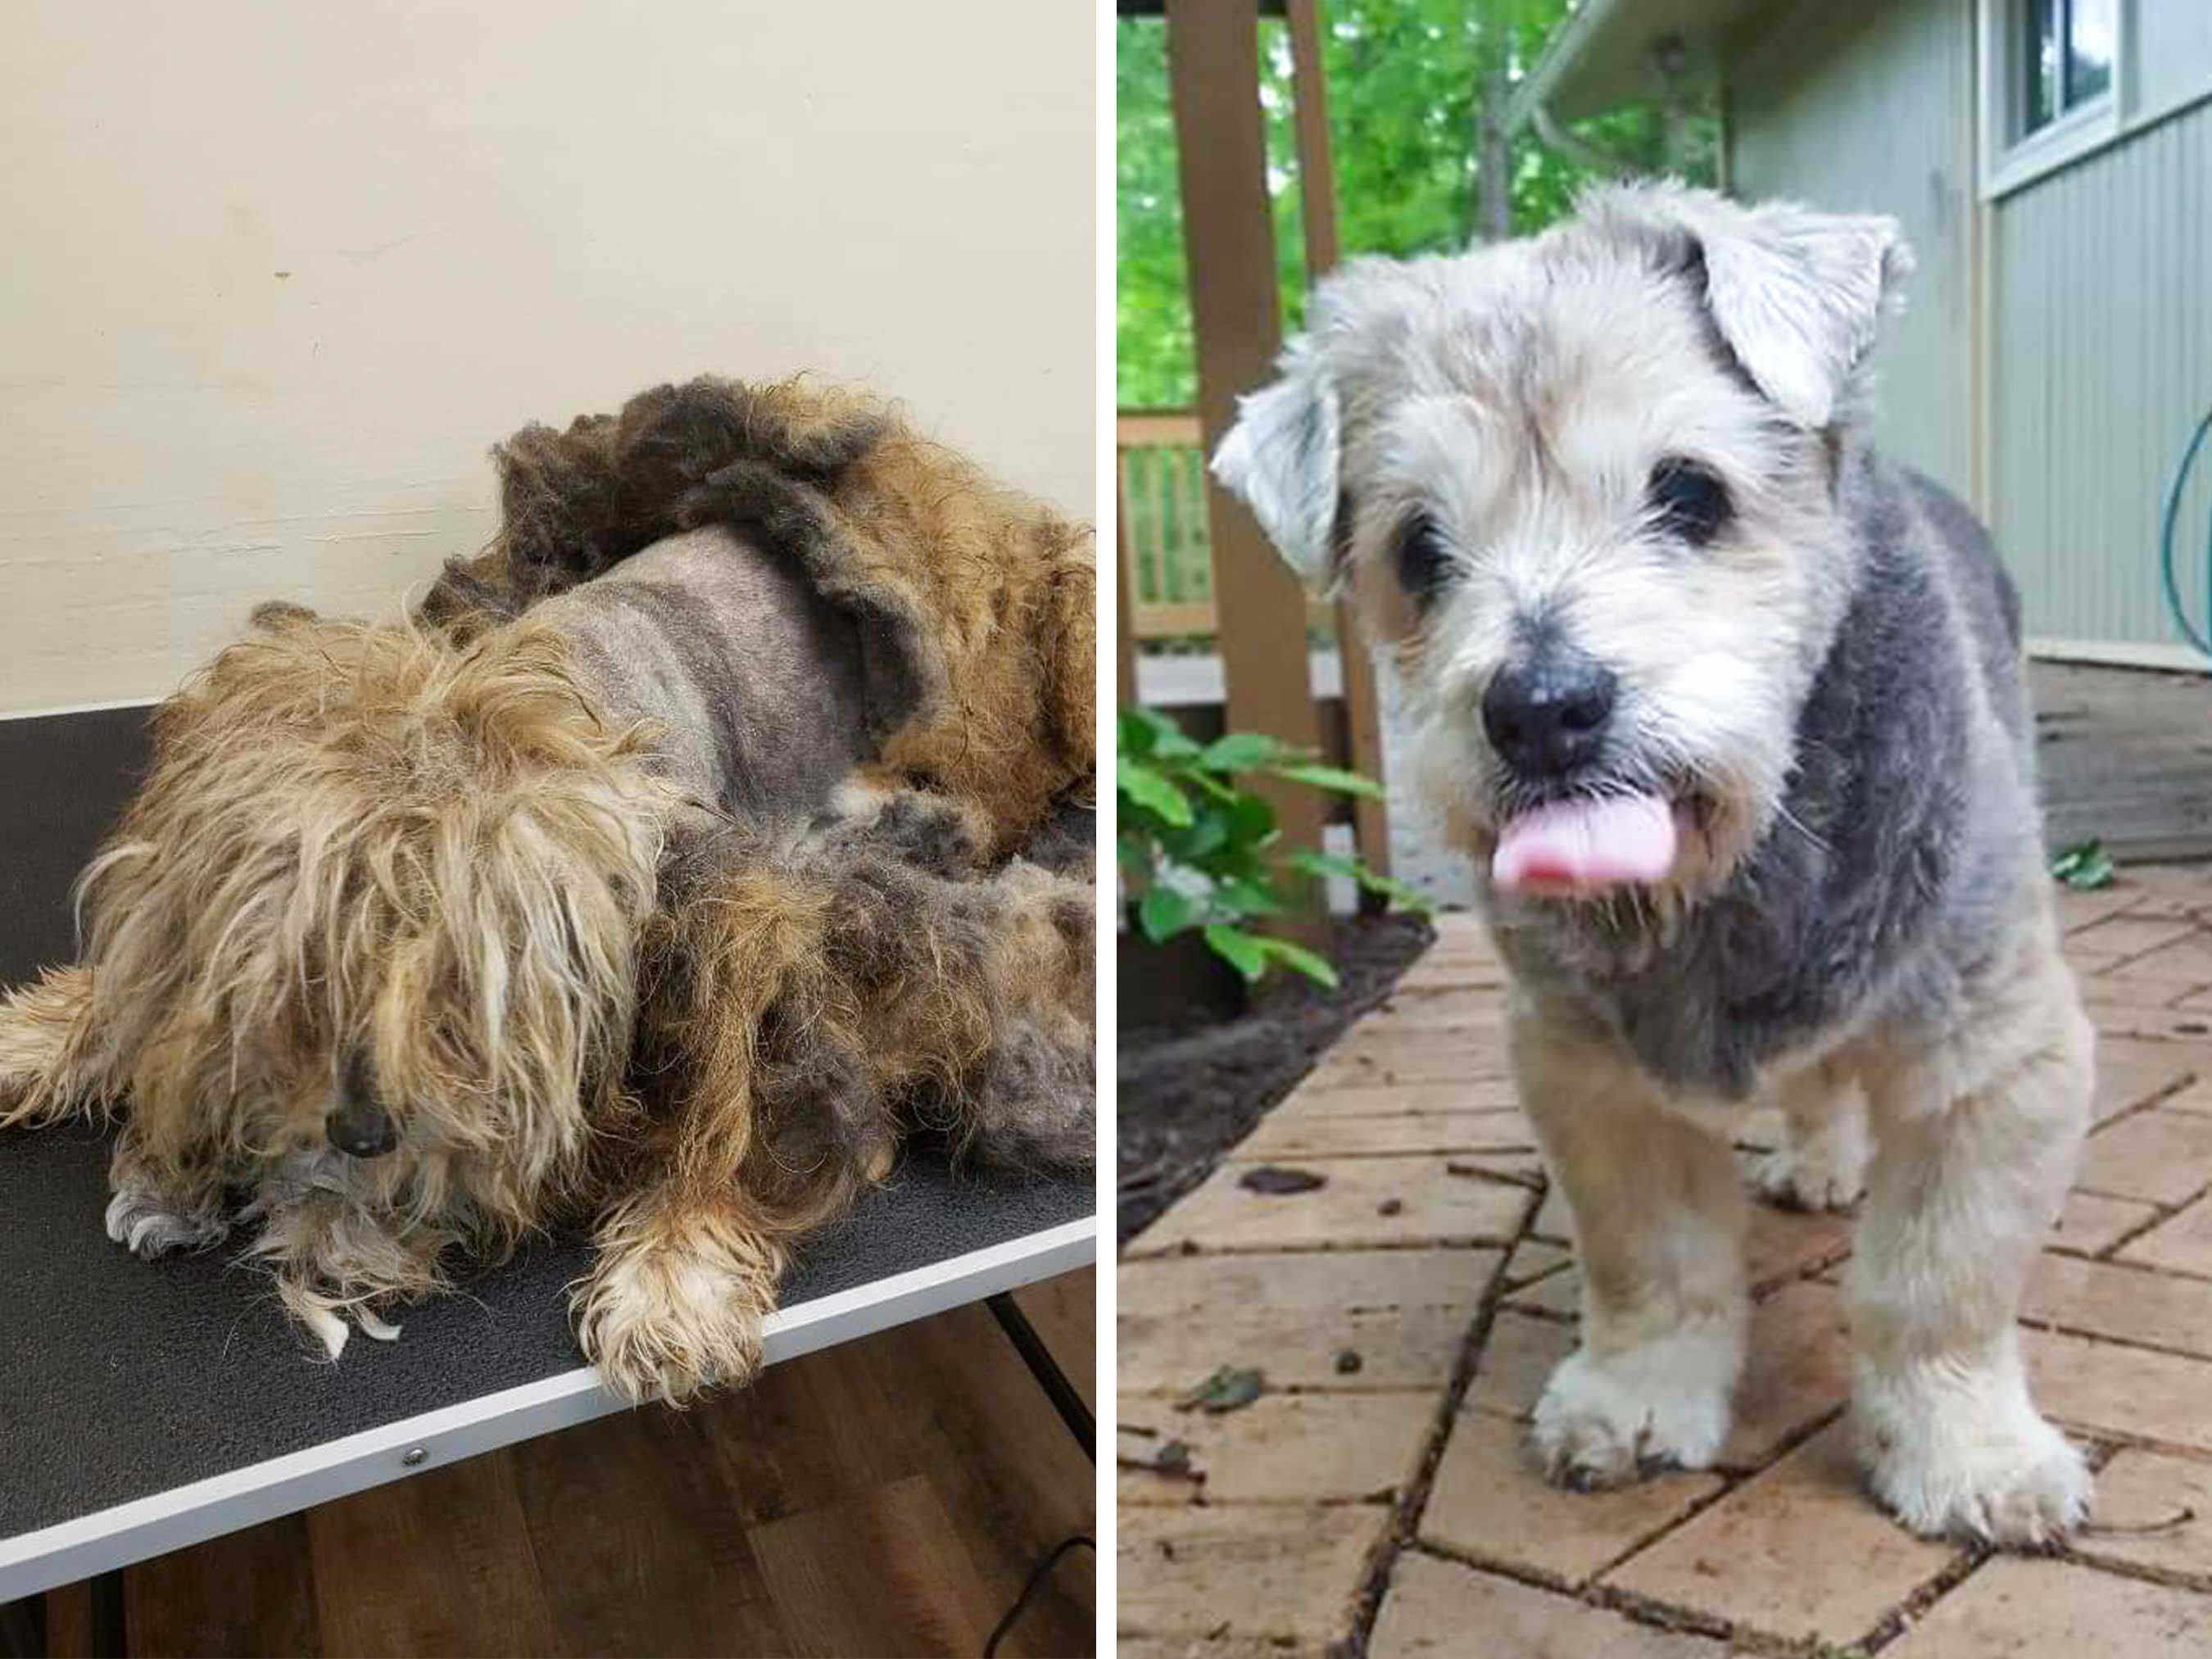 Arlo Was Found By The Side Of A Country Highway. He Was Taken To The Local Shelter Where He Was Quickly Groomed To Remove Painful Mats. His Rescuers Don&Rsquo;T Know Much About His Life Prior To His Rescue, But At About 10 Years Old, It Was Clear He&Rsquo;D Had A Long Rough Road. While Arlo Has Vision And Hearing Issues He&Rsquo;S Been A Great Cuddle Companion To His Foster Family. Although Arlo Is Thankful To Now Be Safe, Clean And Cared For, He&Rsquo;D Love A Family Of His Very Own.